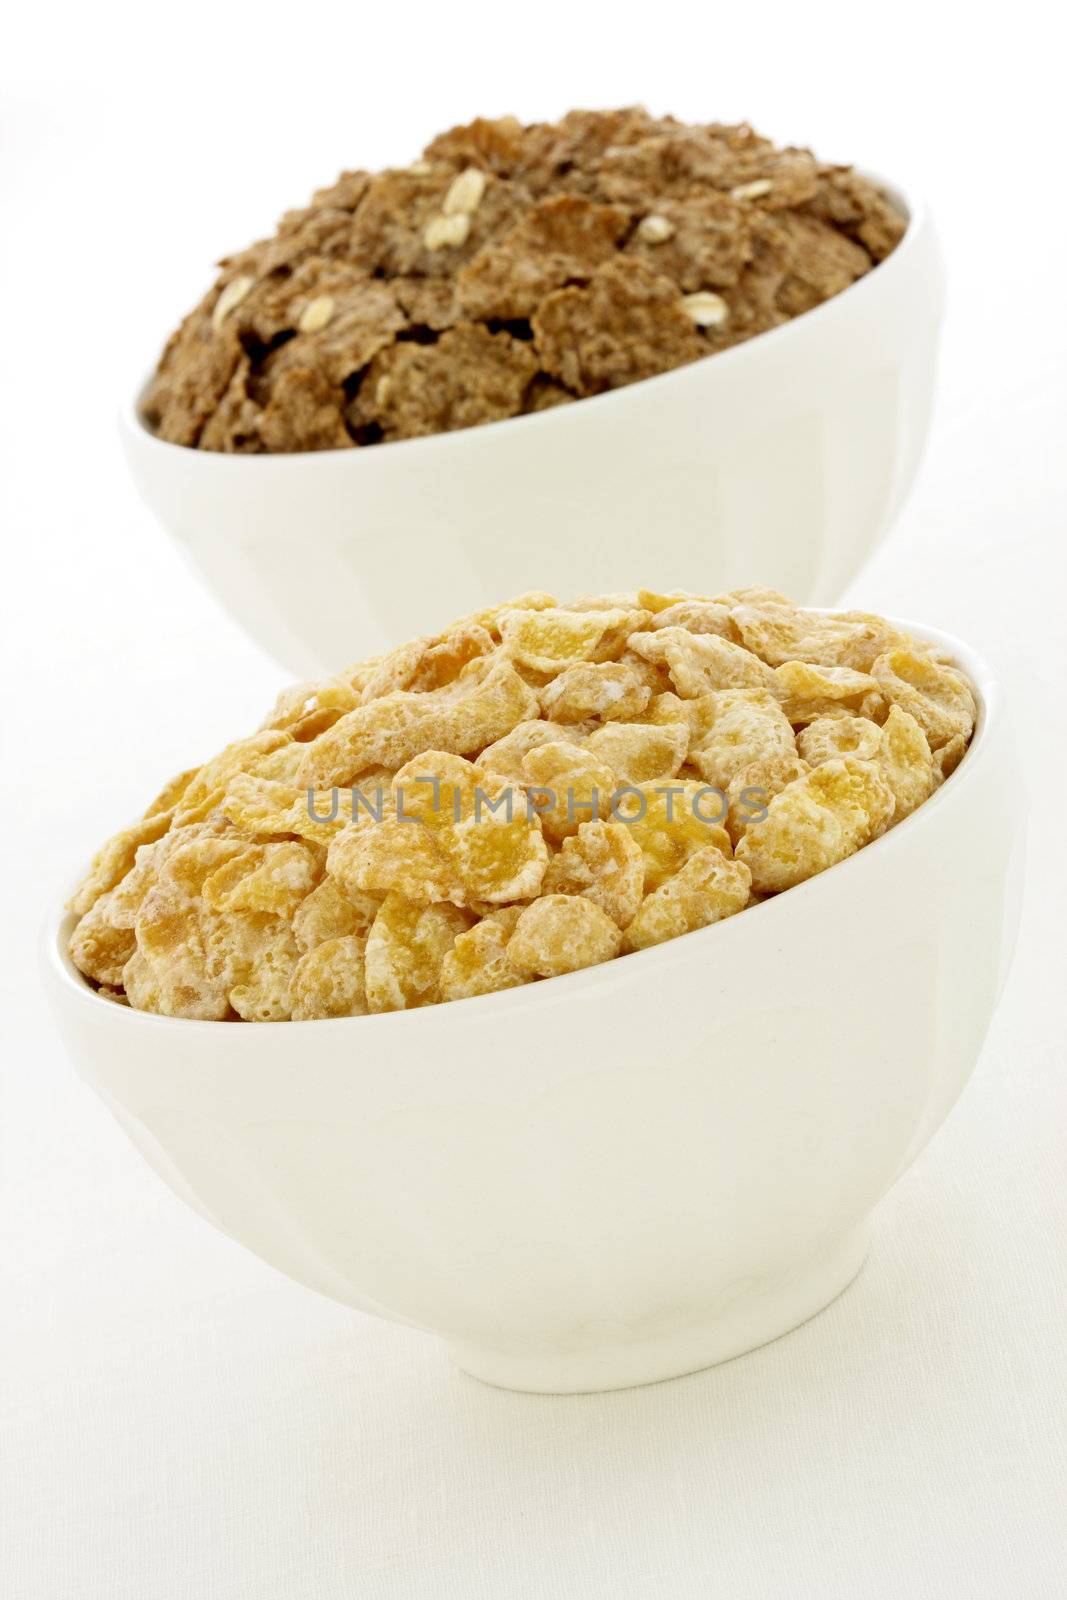 delicious and healthy frosted cornflakes and bran flakes by tacar